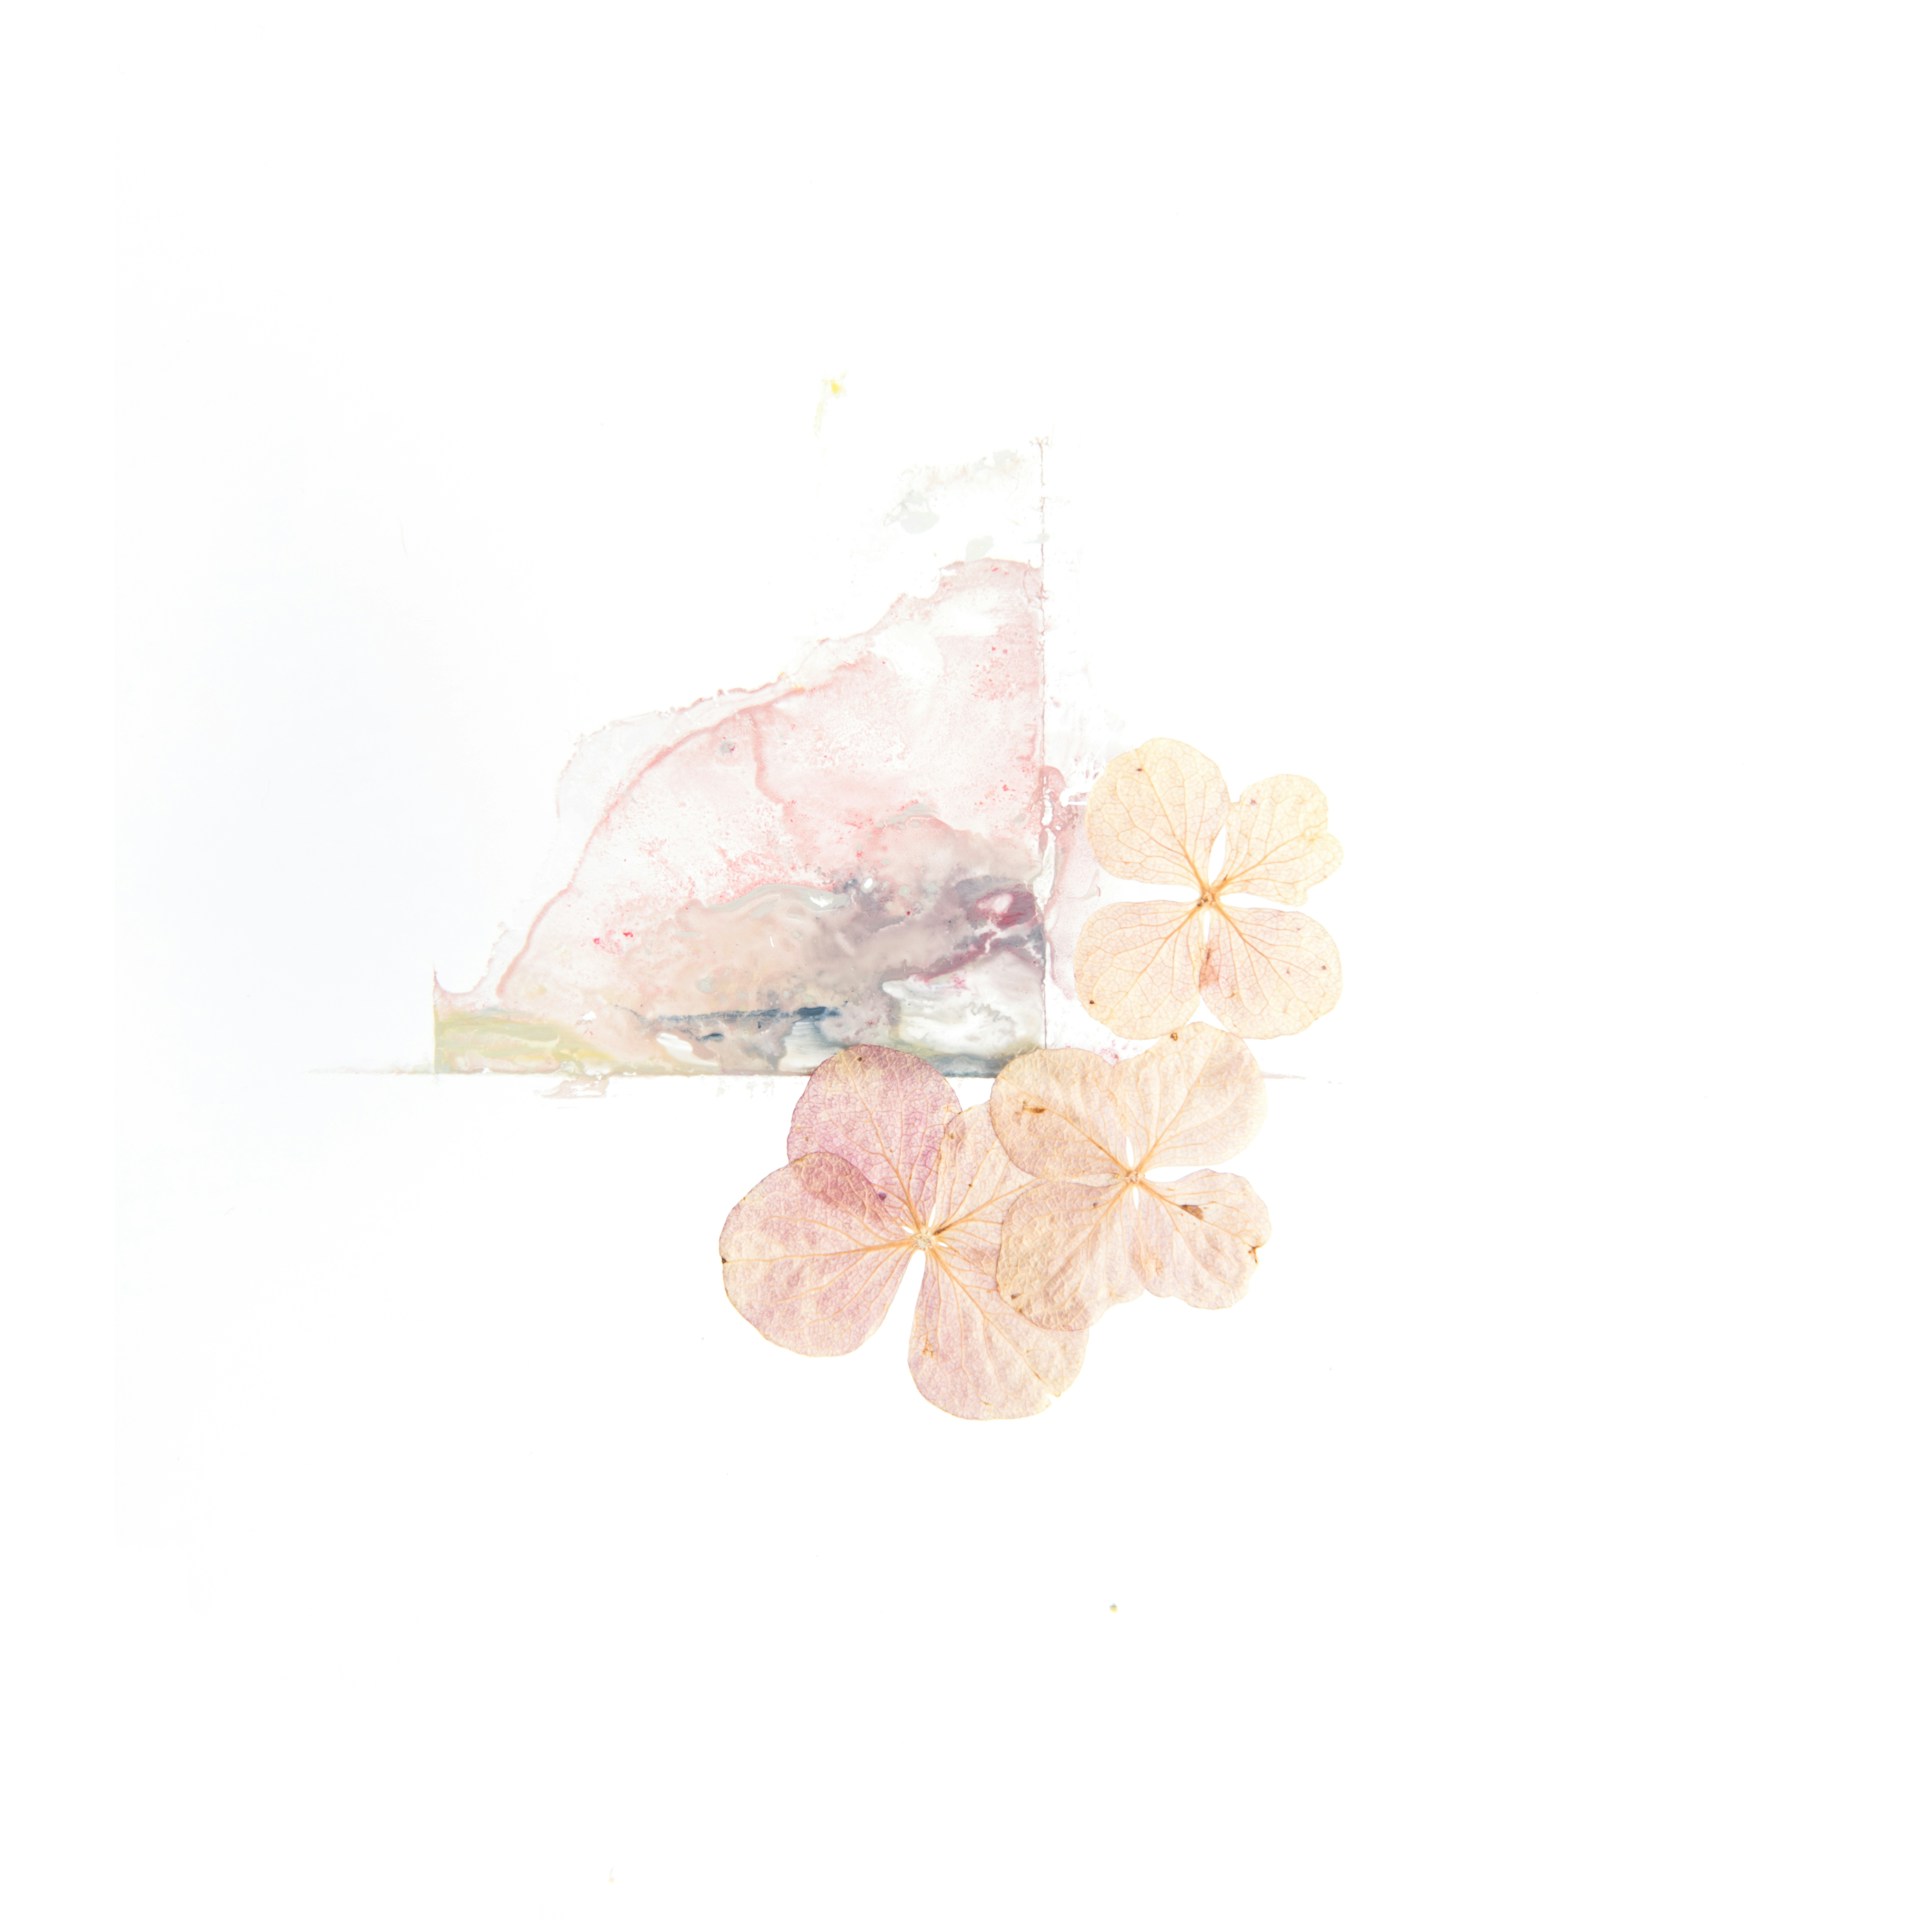 Abstract Beige Floral Wallpaper 1920x1920